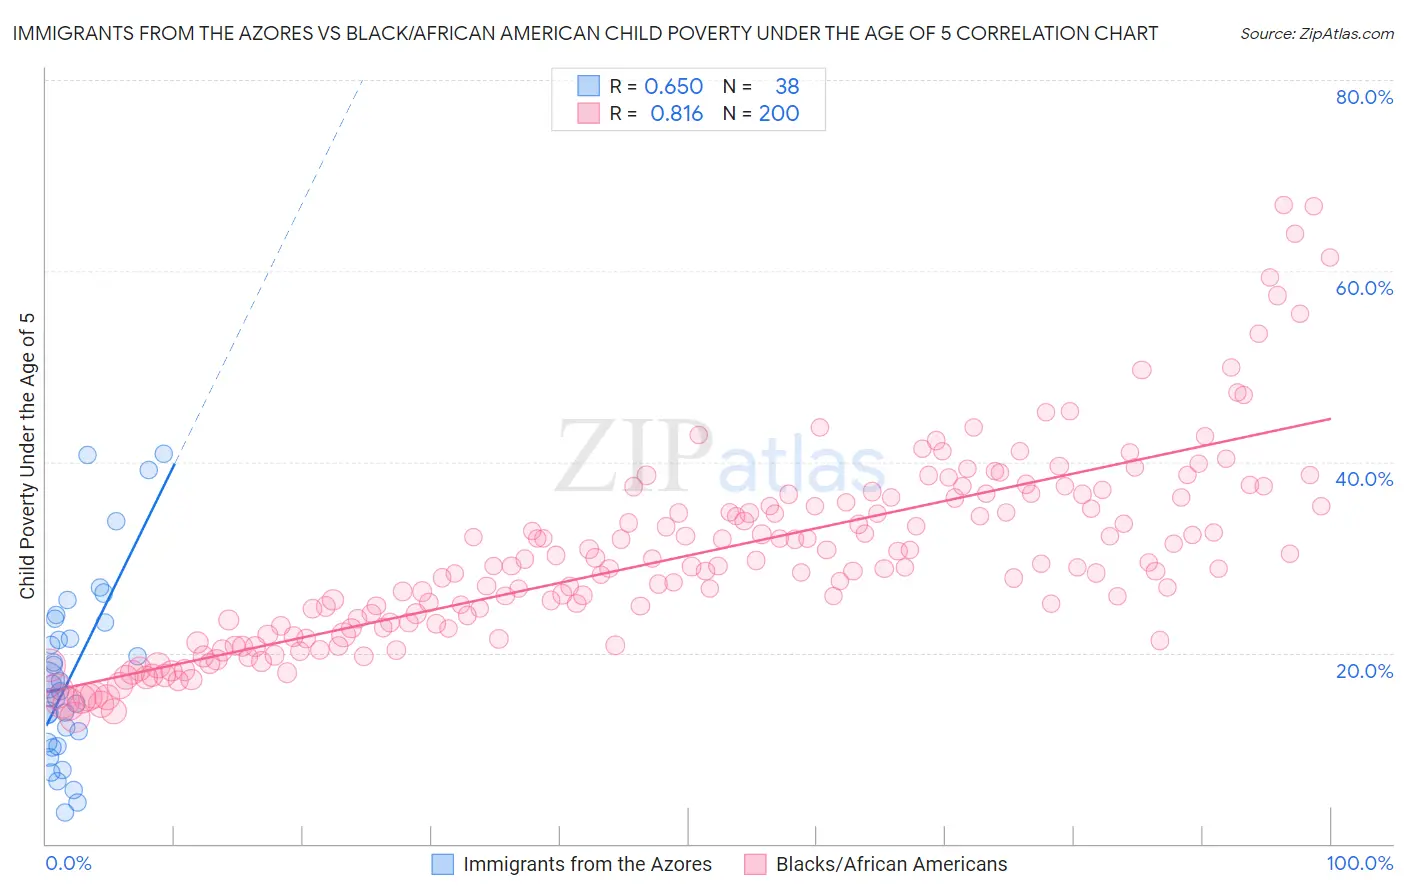 Immigrants from the Azores vs Black/African American Child Poverty Under the Age of 5